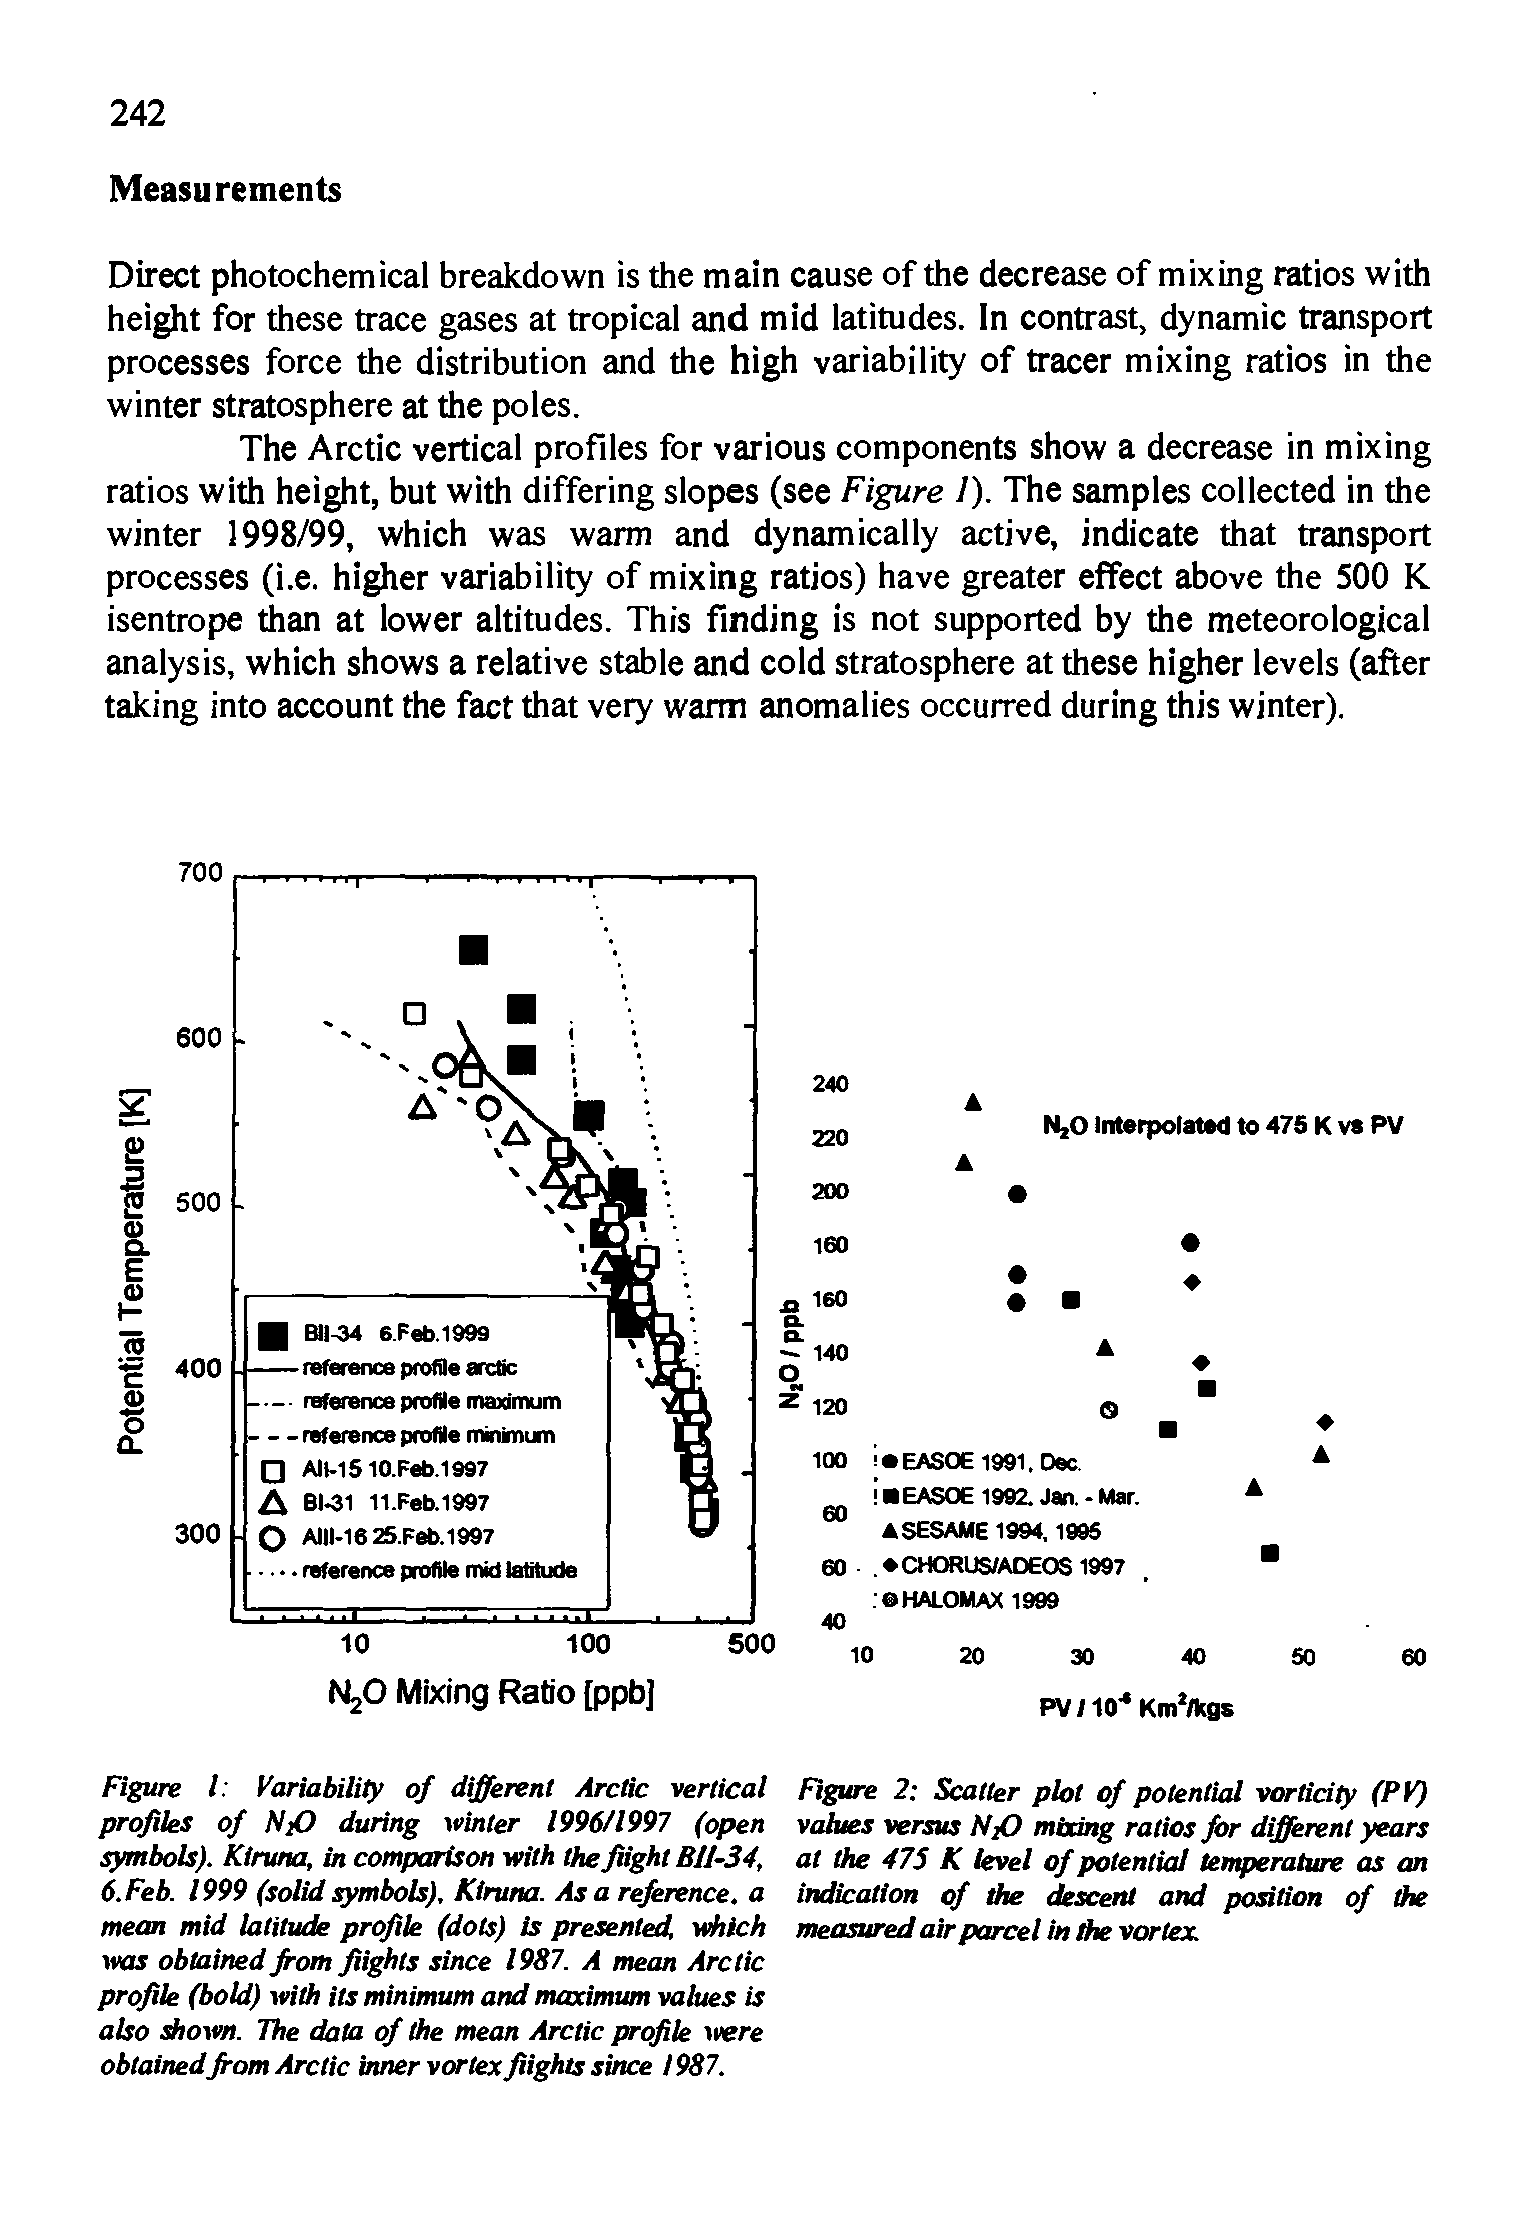 Figure 2 Scatter plot of potential vorticity (PV) values versus NjO mixing ratios for different years at the 475 K level of potential temperature as an indication of the descent and position of the measured air parcel in die vortex...